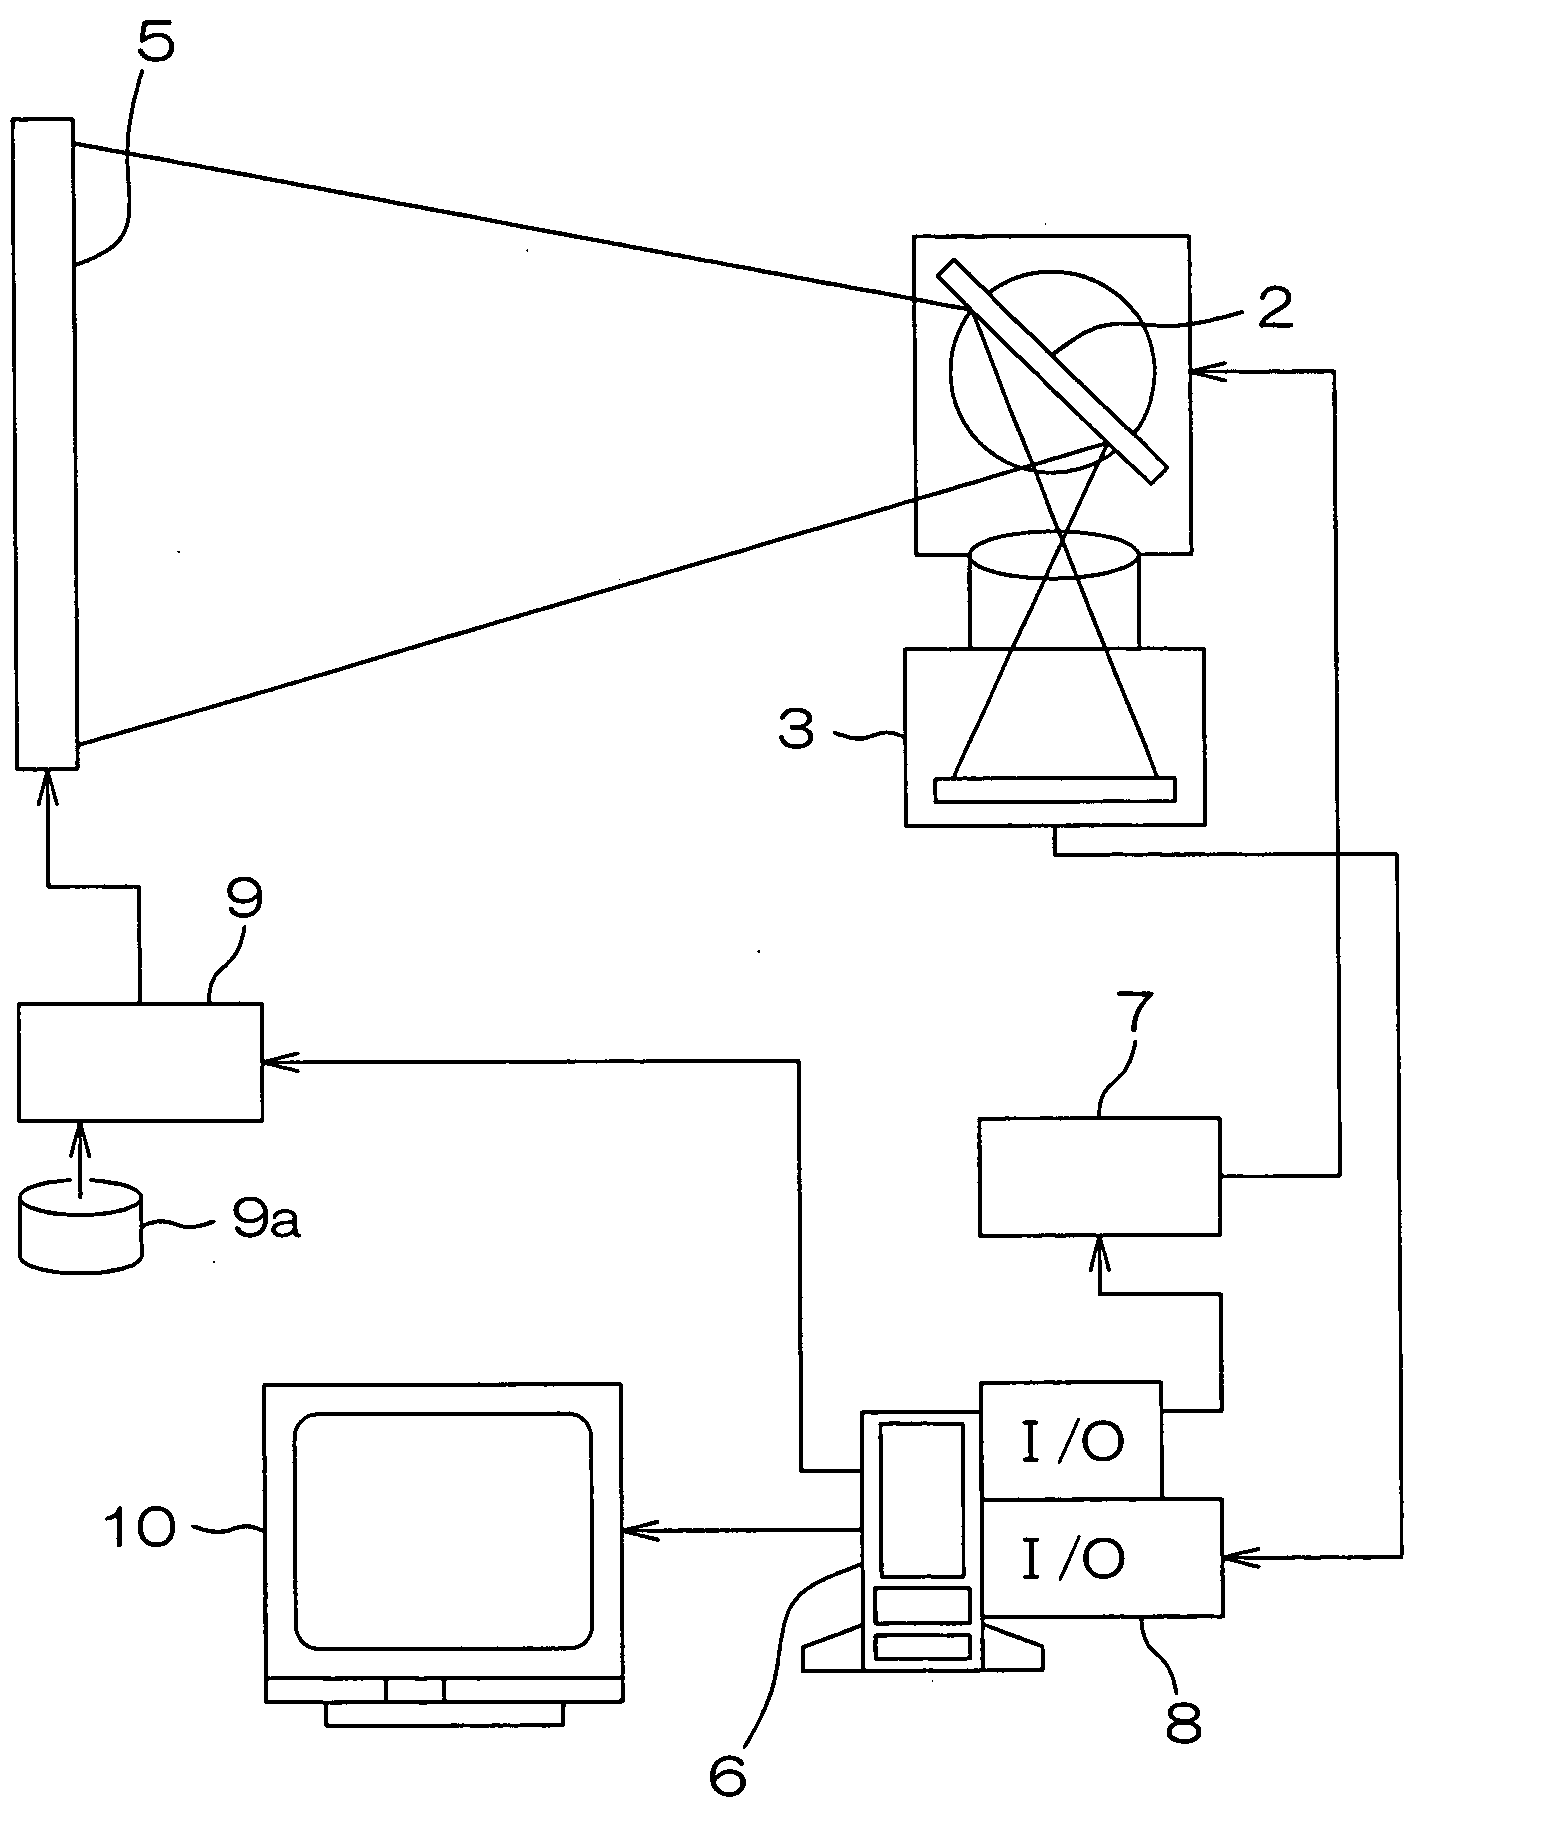 System and method for measuring/evaluating moving image quality of screen